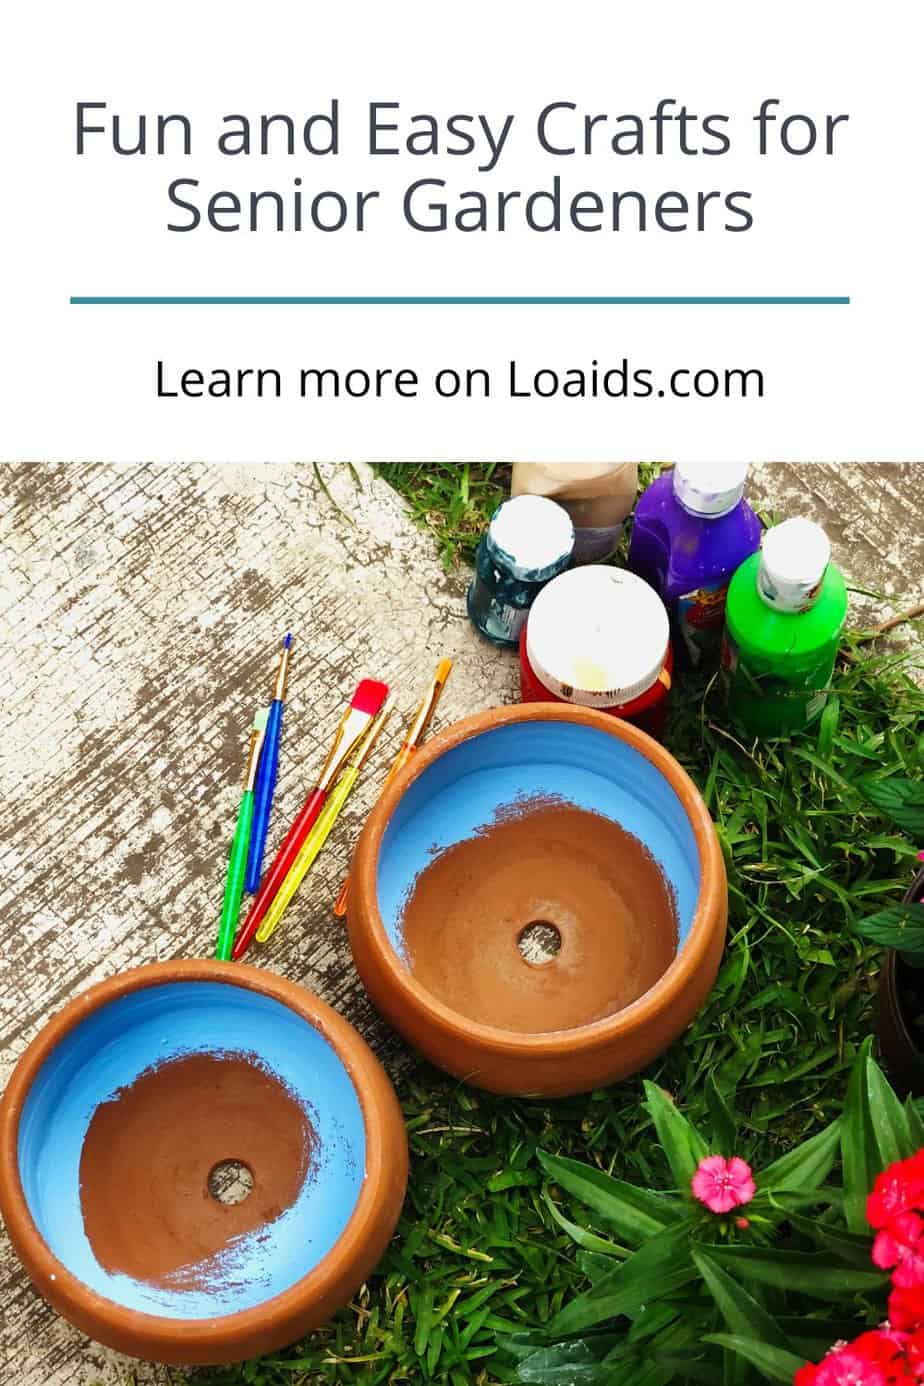 materials to make some easy garden crafts for seniors